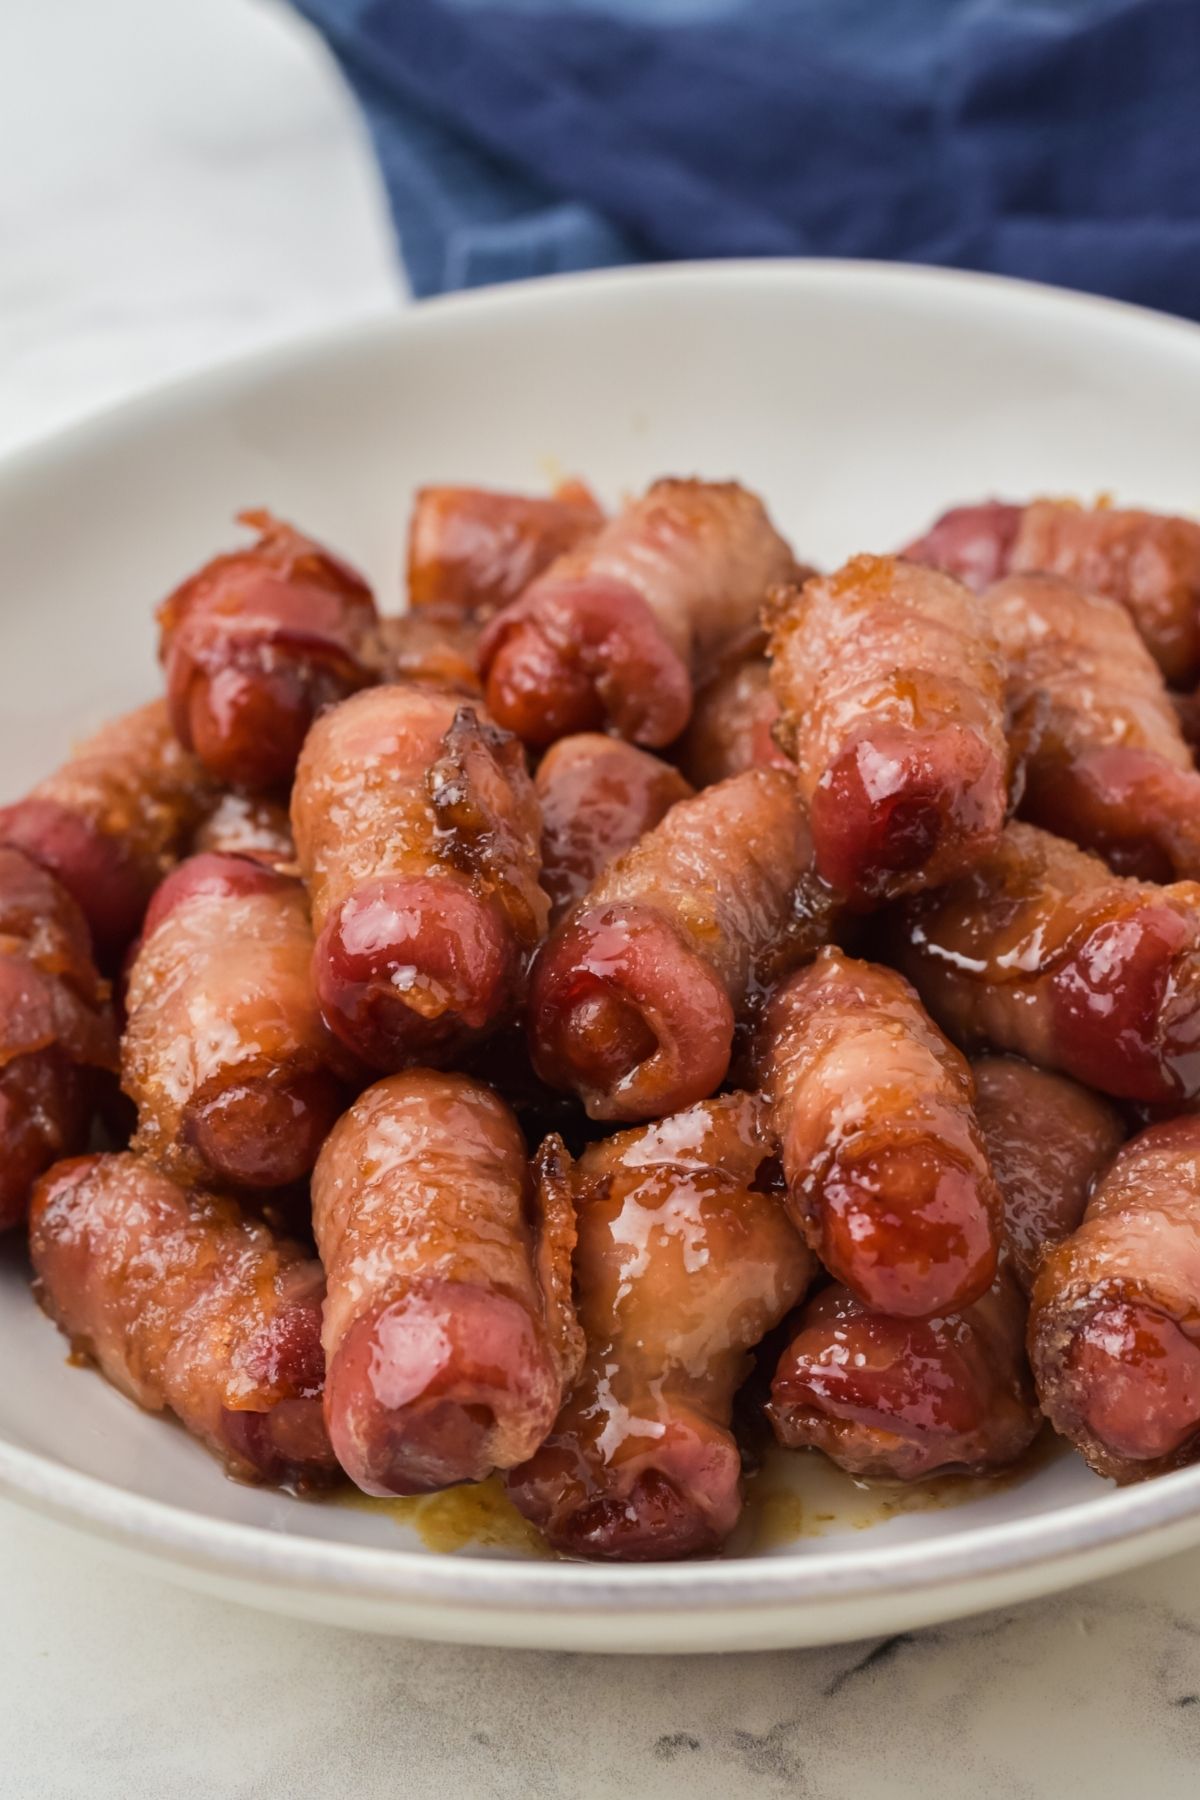 brown sugar melted on bacon wrapped smokies in white bowl